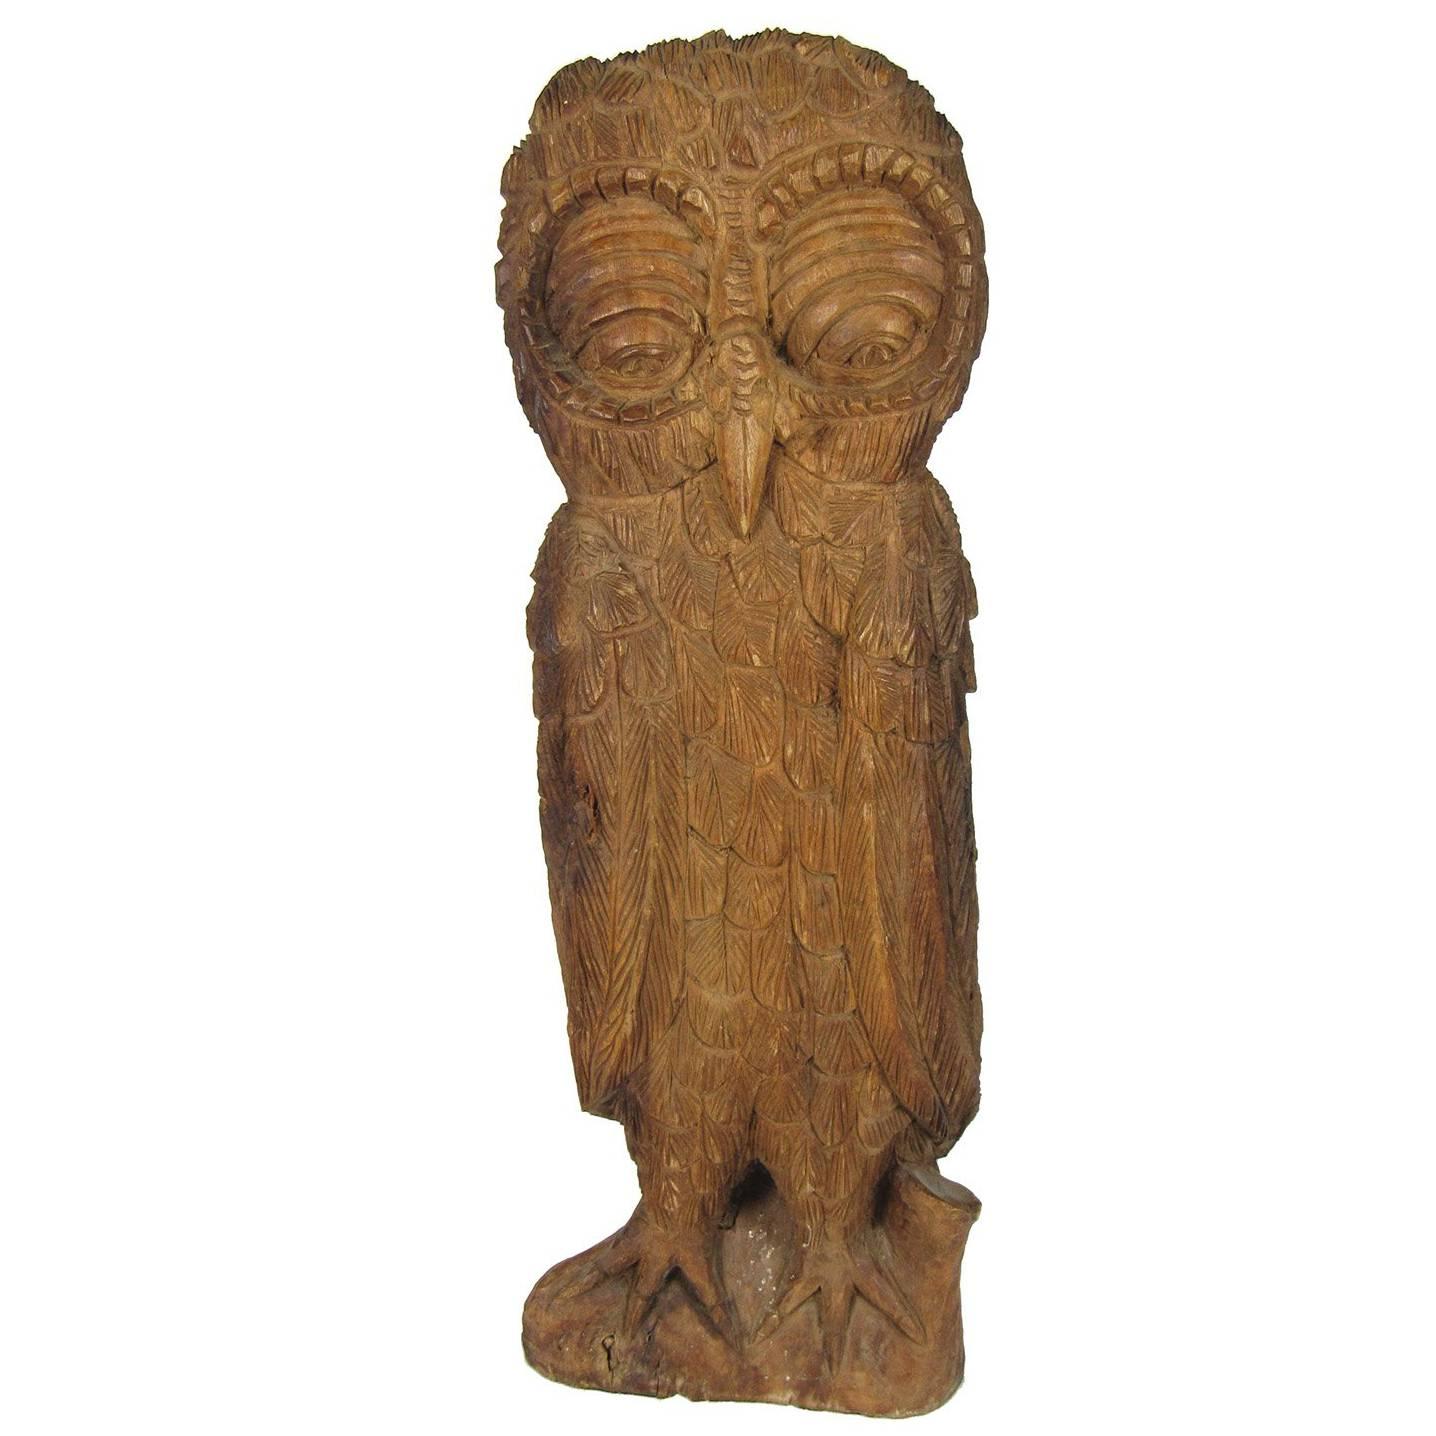 Antique Whimsical Late 19th or Early 20th Century Folk Art Carved Owl